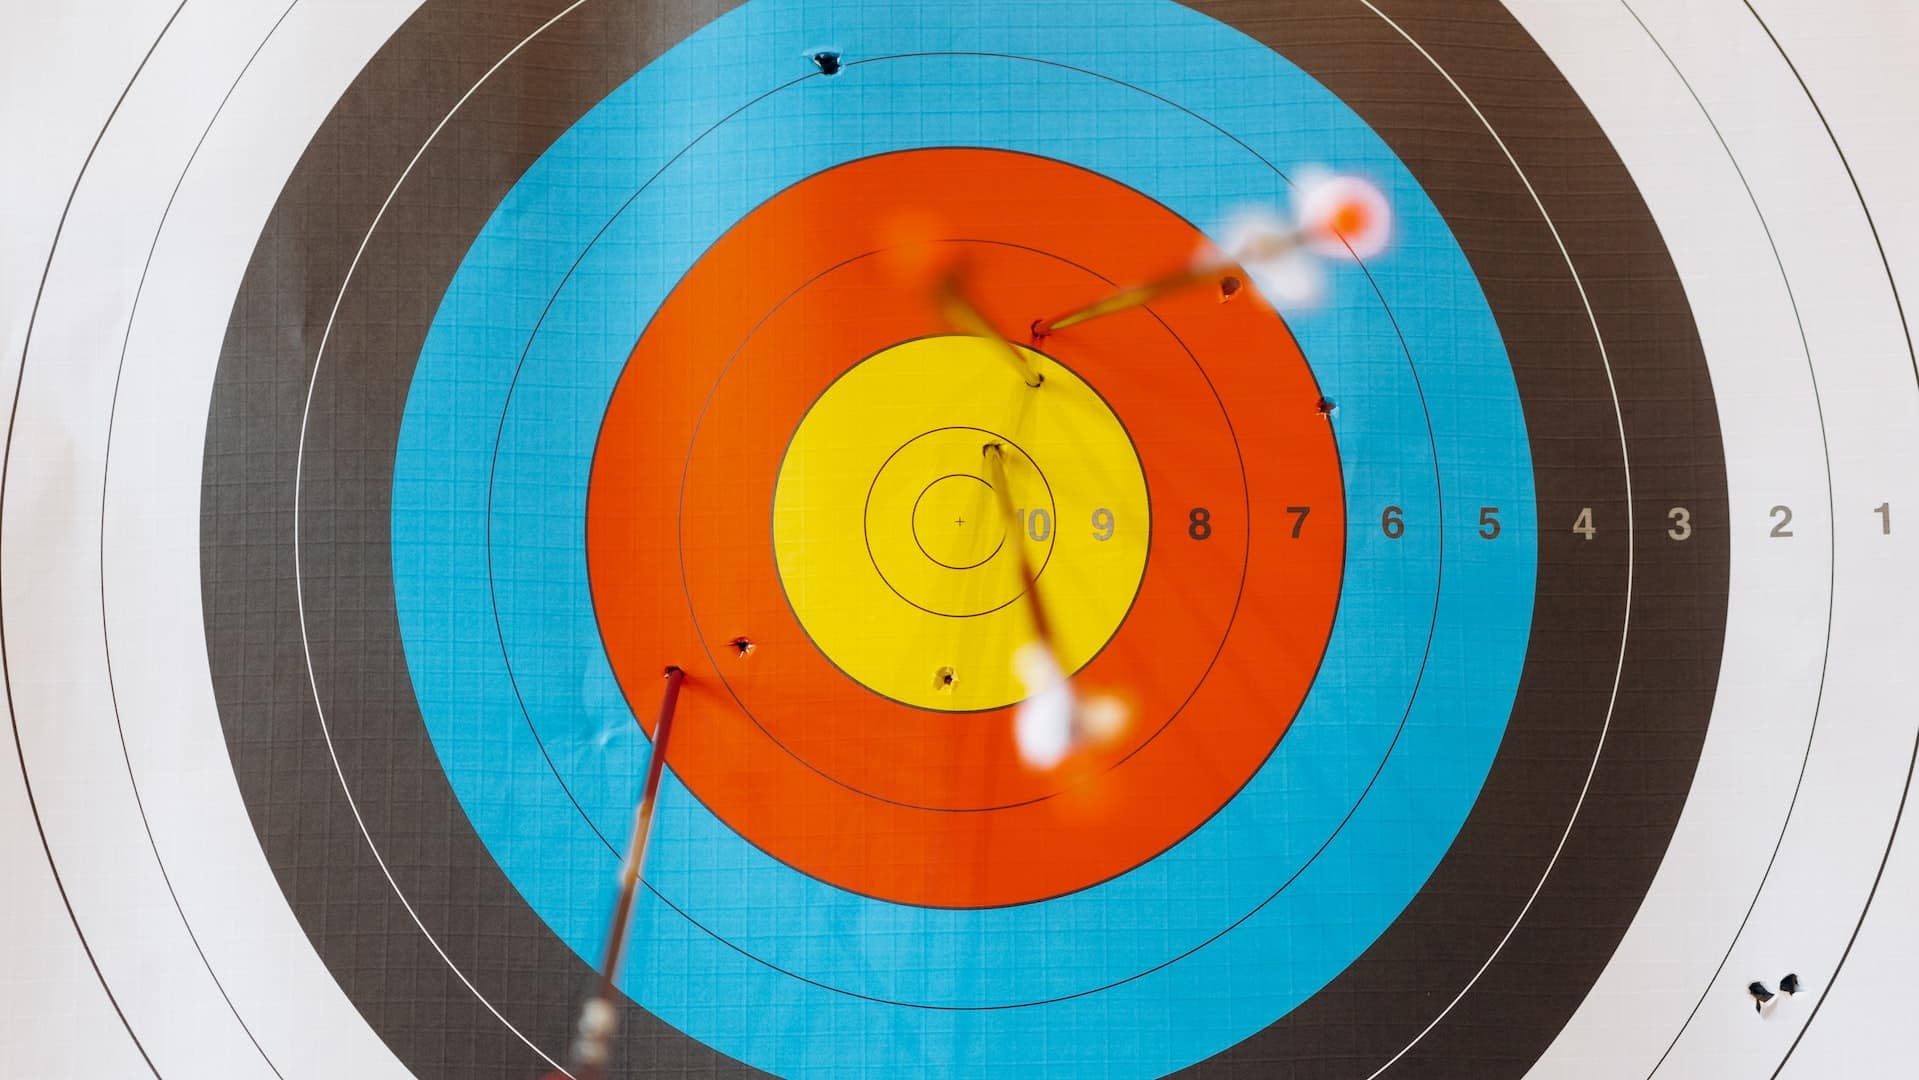 A white, black, blue, red & yellow archery target with arrows shot into it